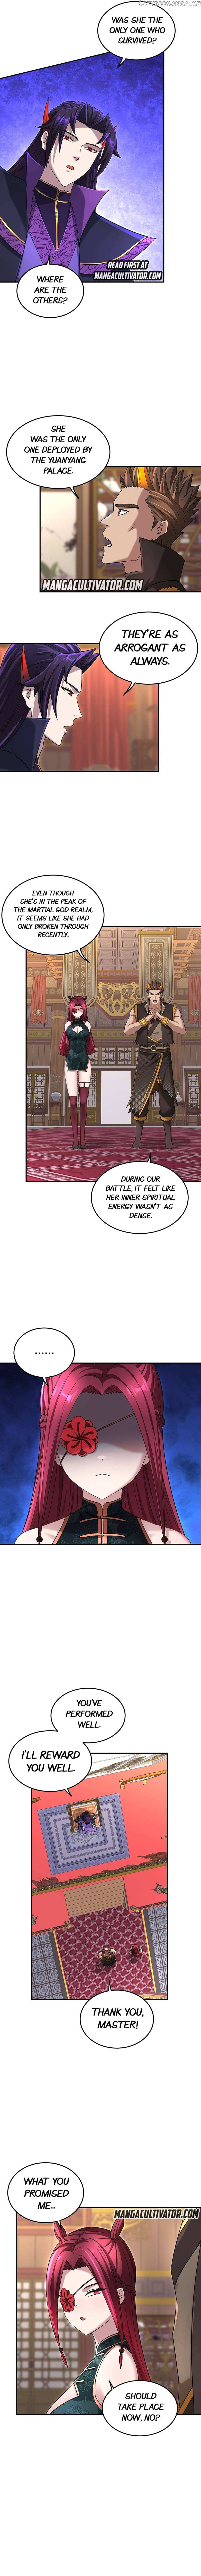 I Have Become The Demonic Ancestor - Page 3